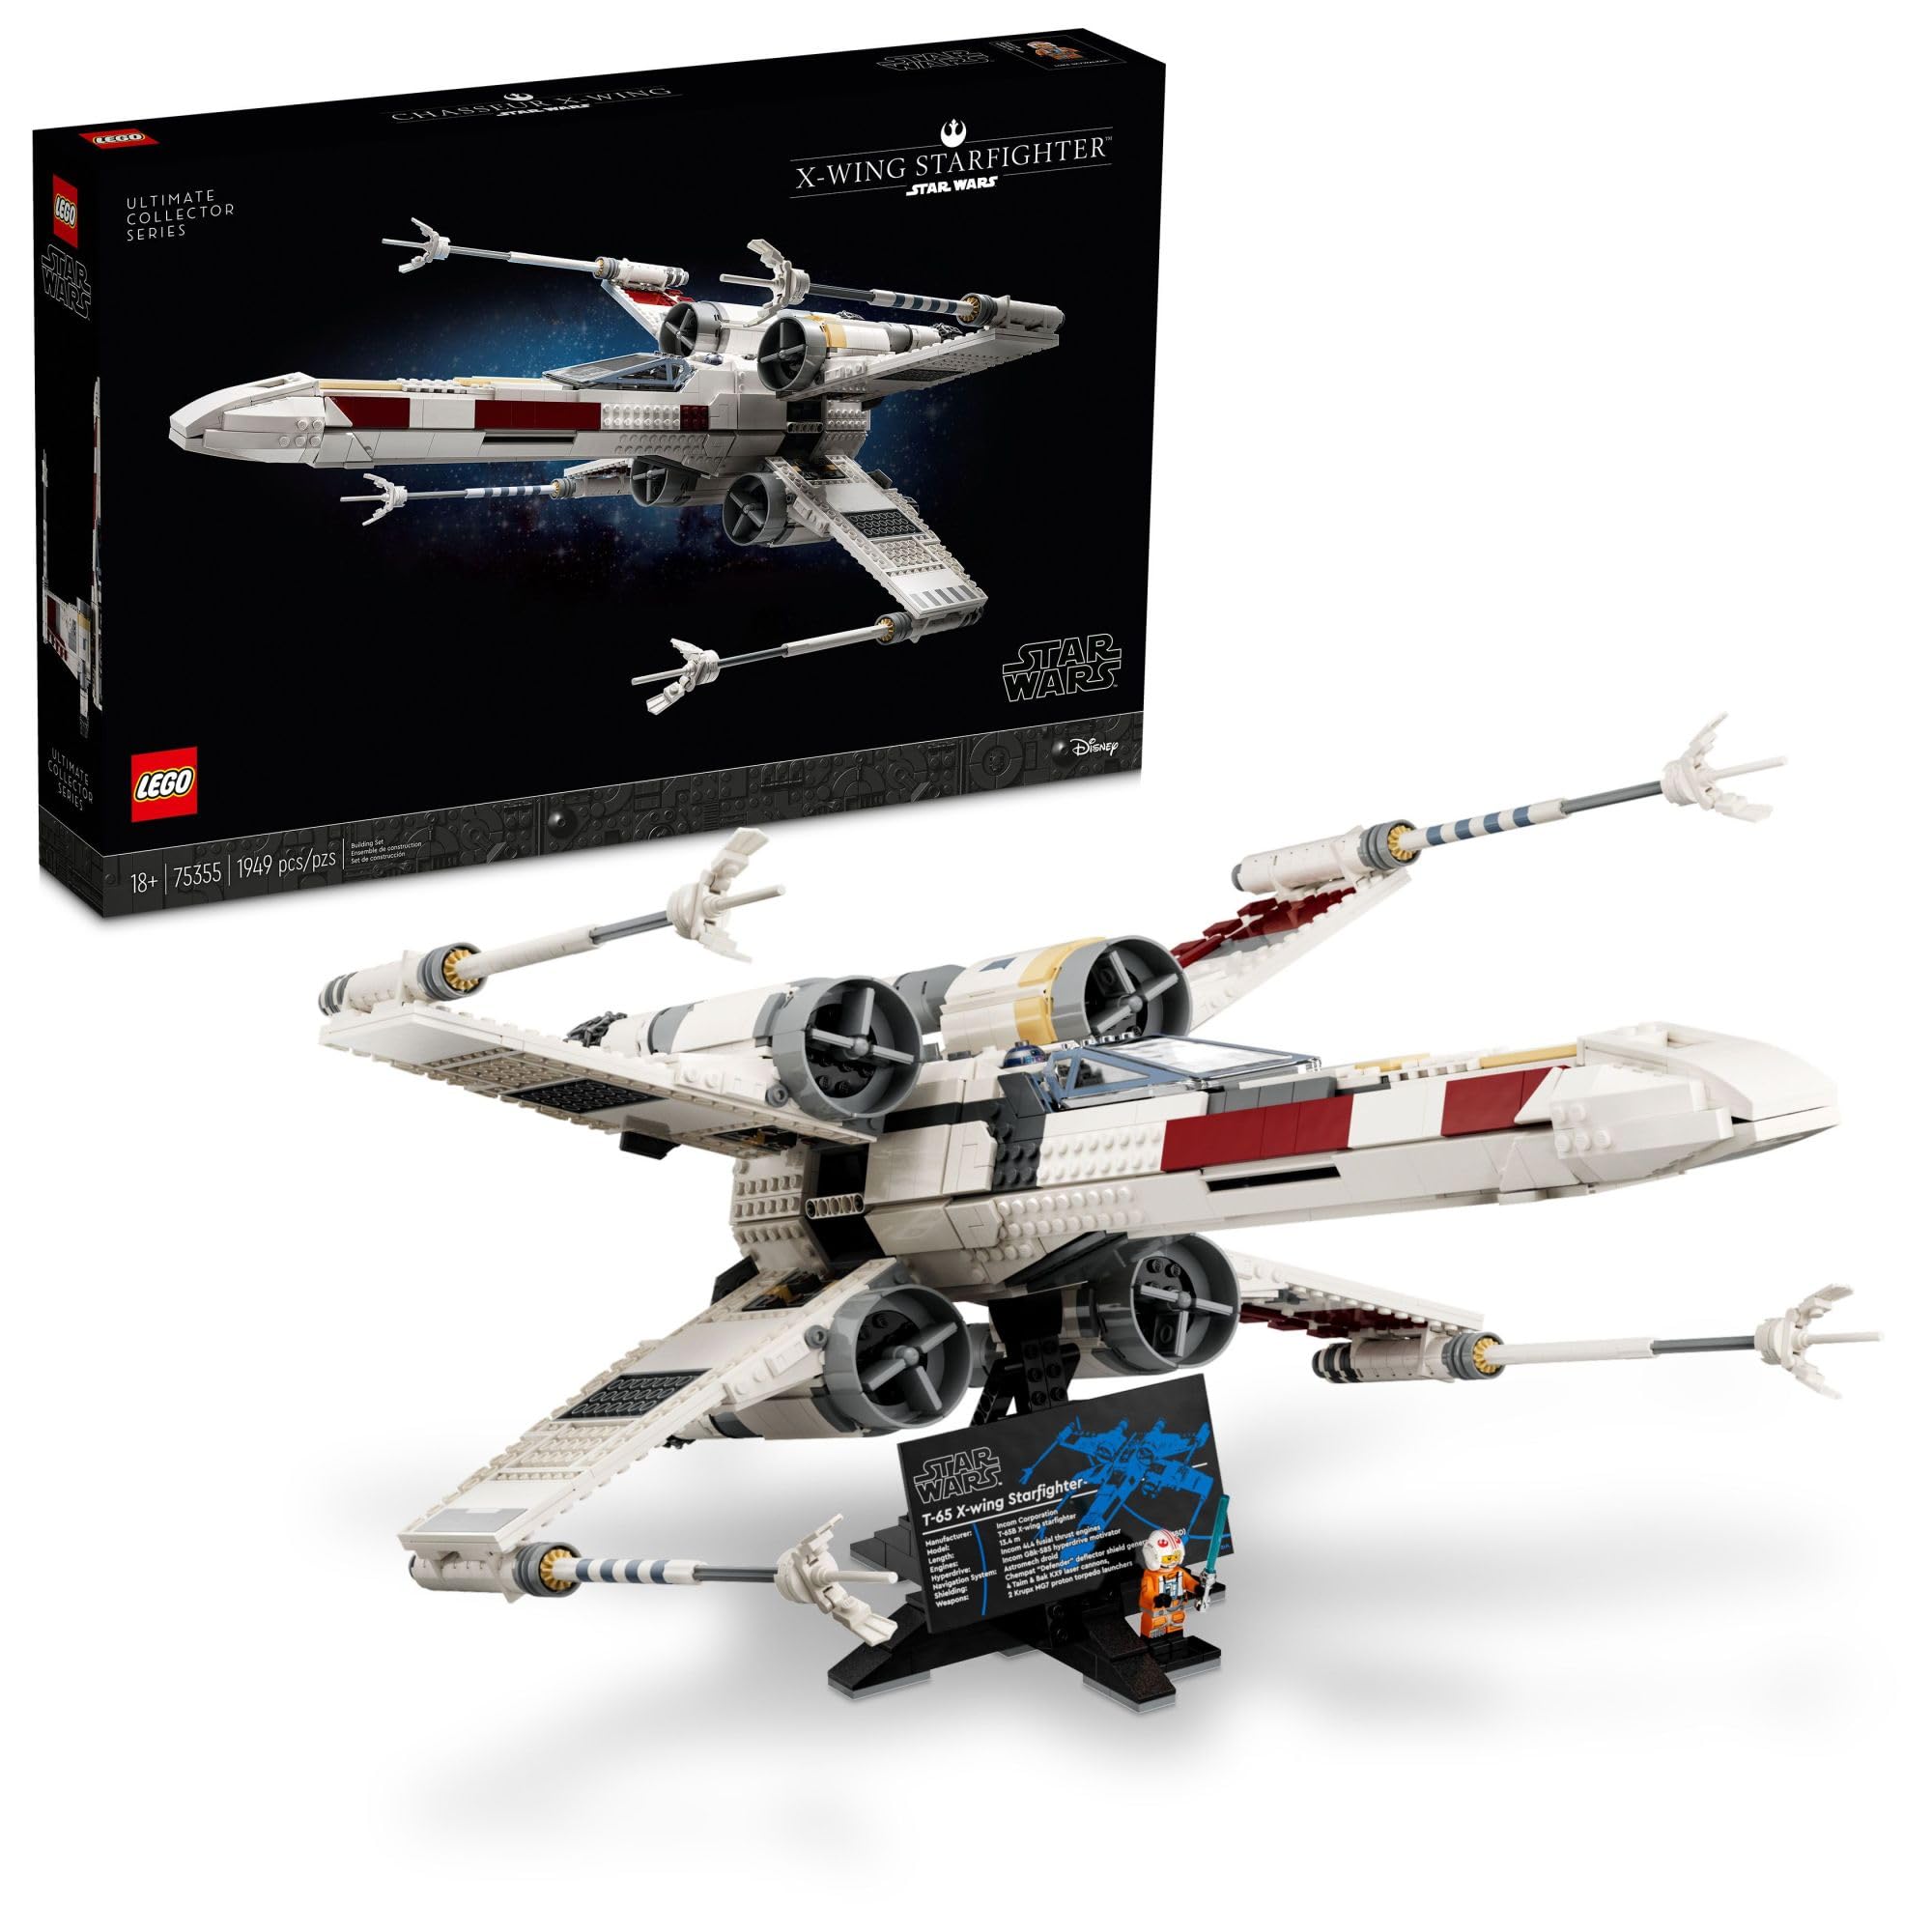 LEGO Star Wars Ultimate Collector Series X-Wing Starfighter 75355 Building Set for Adults, Star Wars Collectible for Build and Display with Luke Skywalker Minifigure, Fun Gift Idea for Star Wars Fans